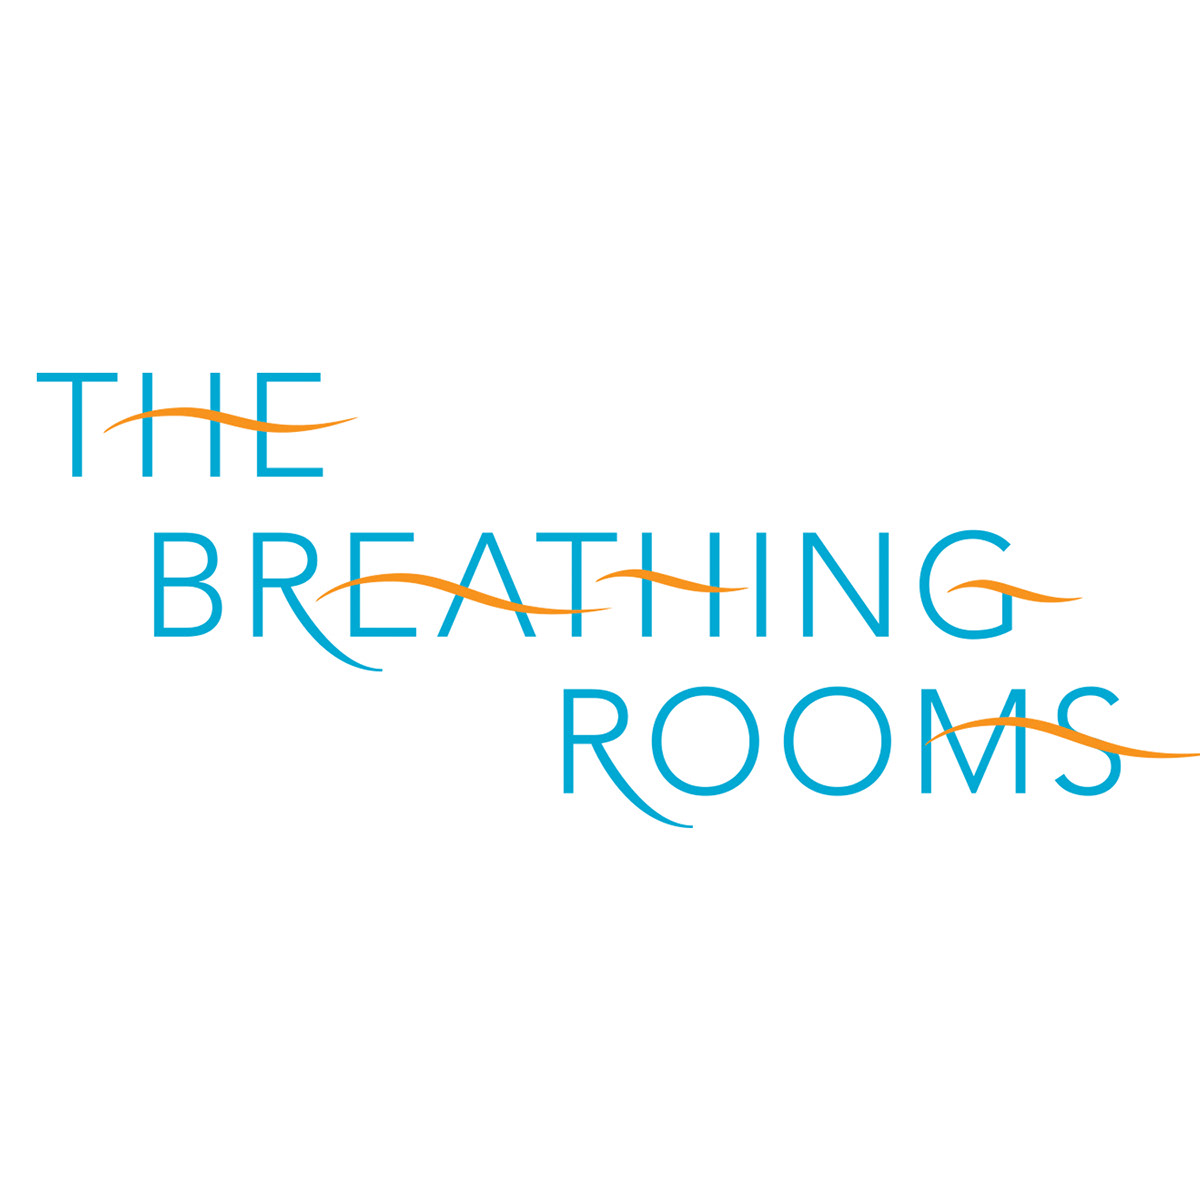 A logo for The Breathing Rooms typeset in a san serif typeface in blue with orange wavy lines.